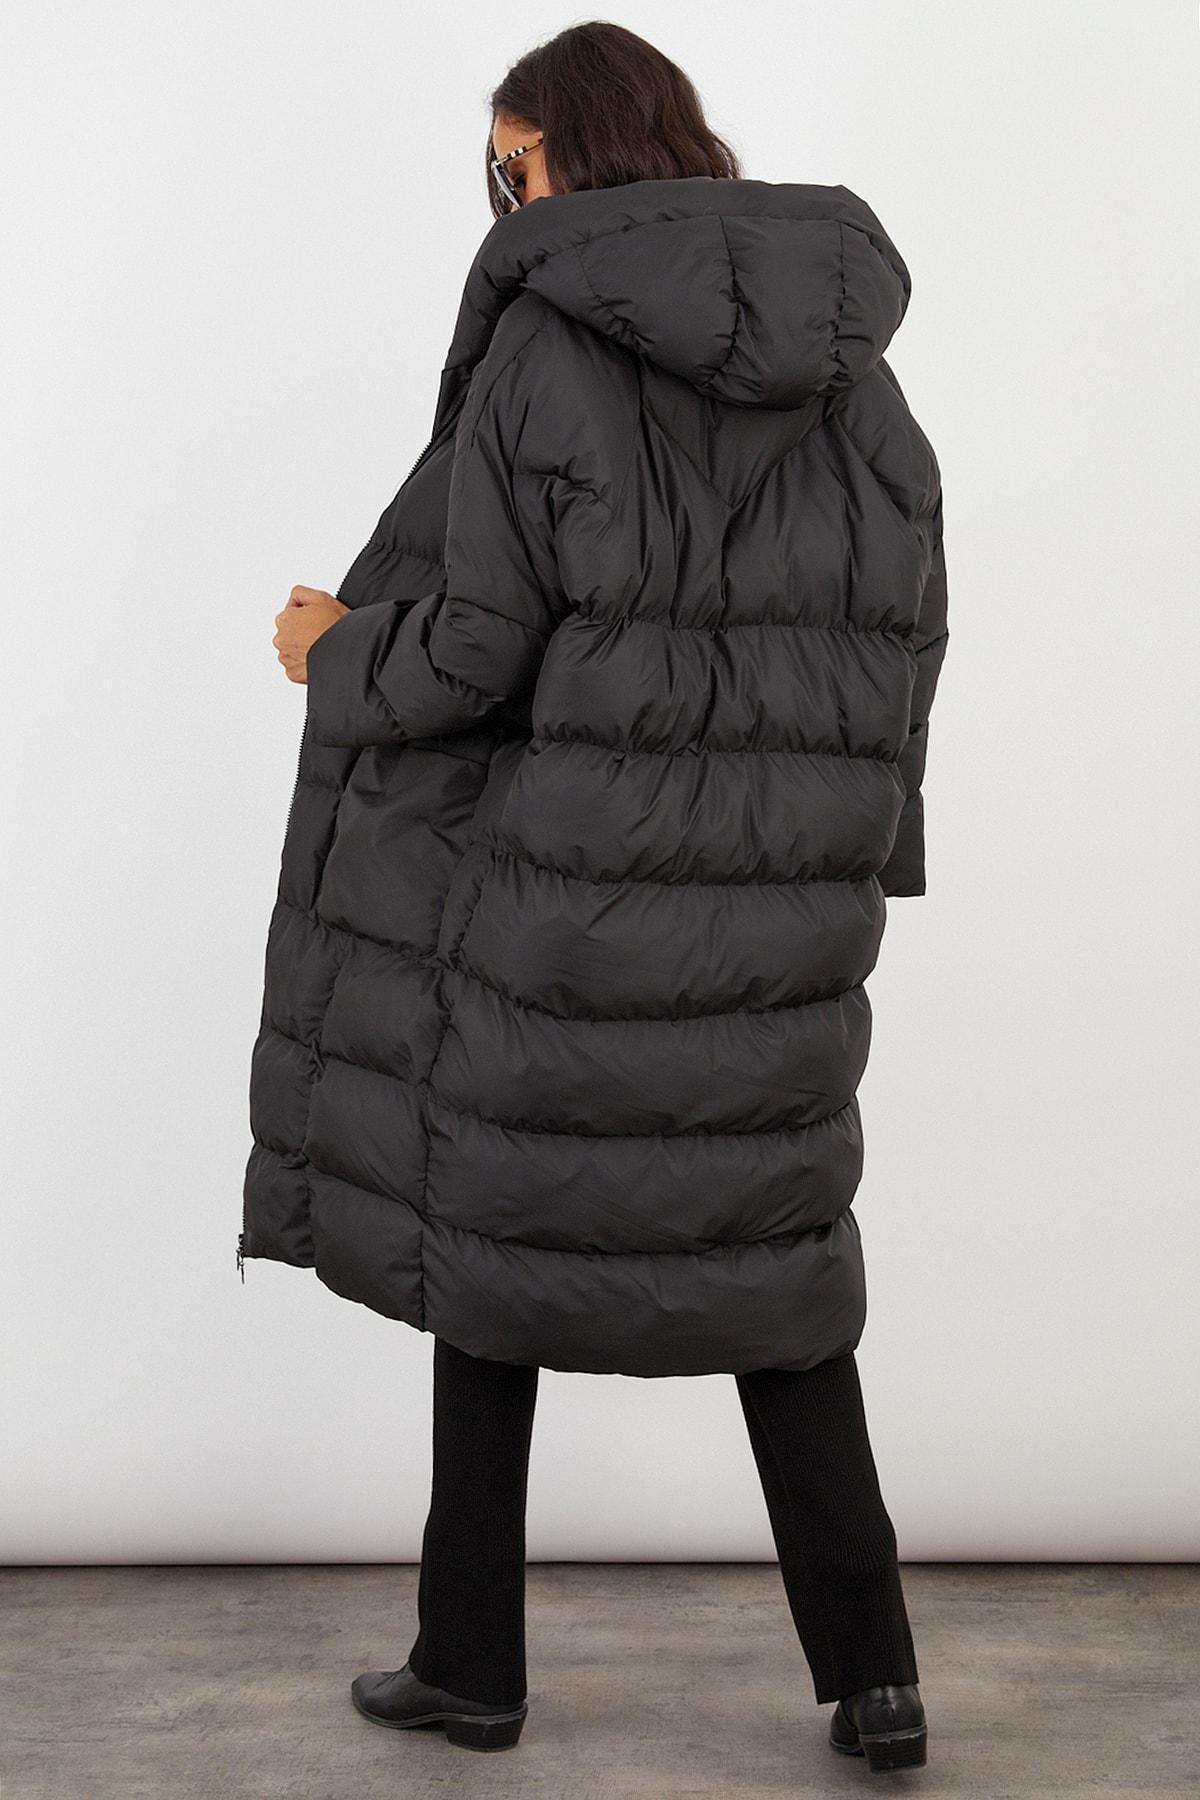 Cool & Sexy - Black Hooded Puffer Jacket